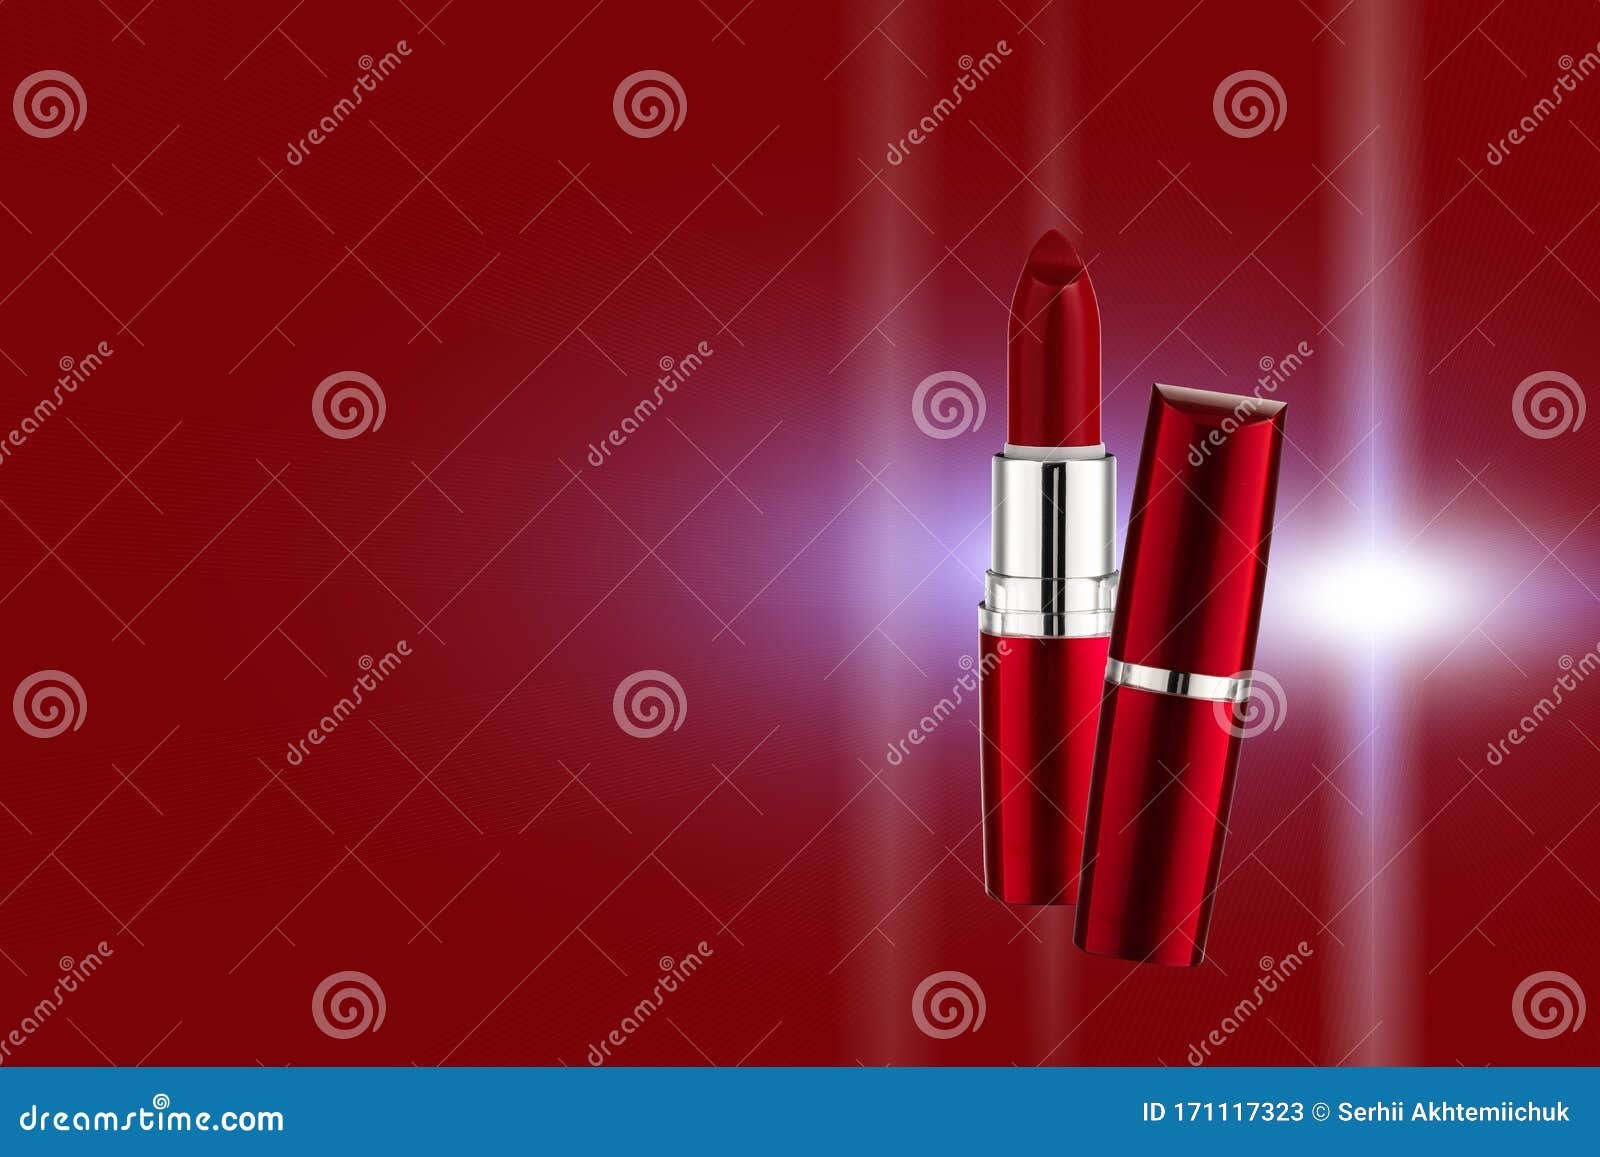 Creative Advertising Photo Of Lipstick On A Background ...